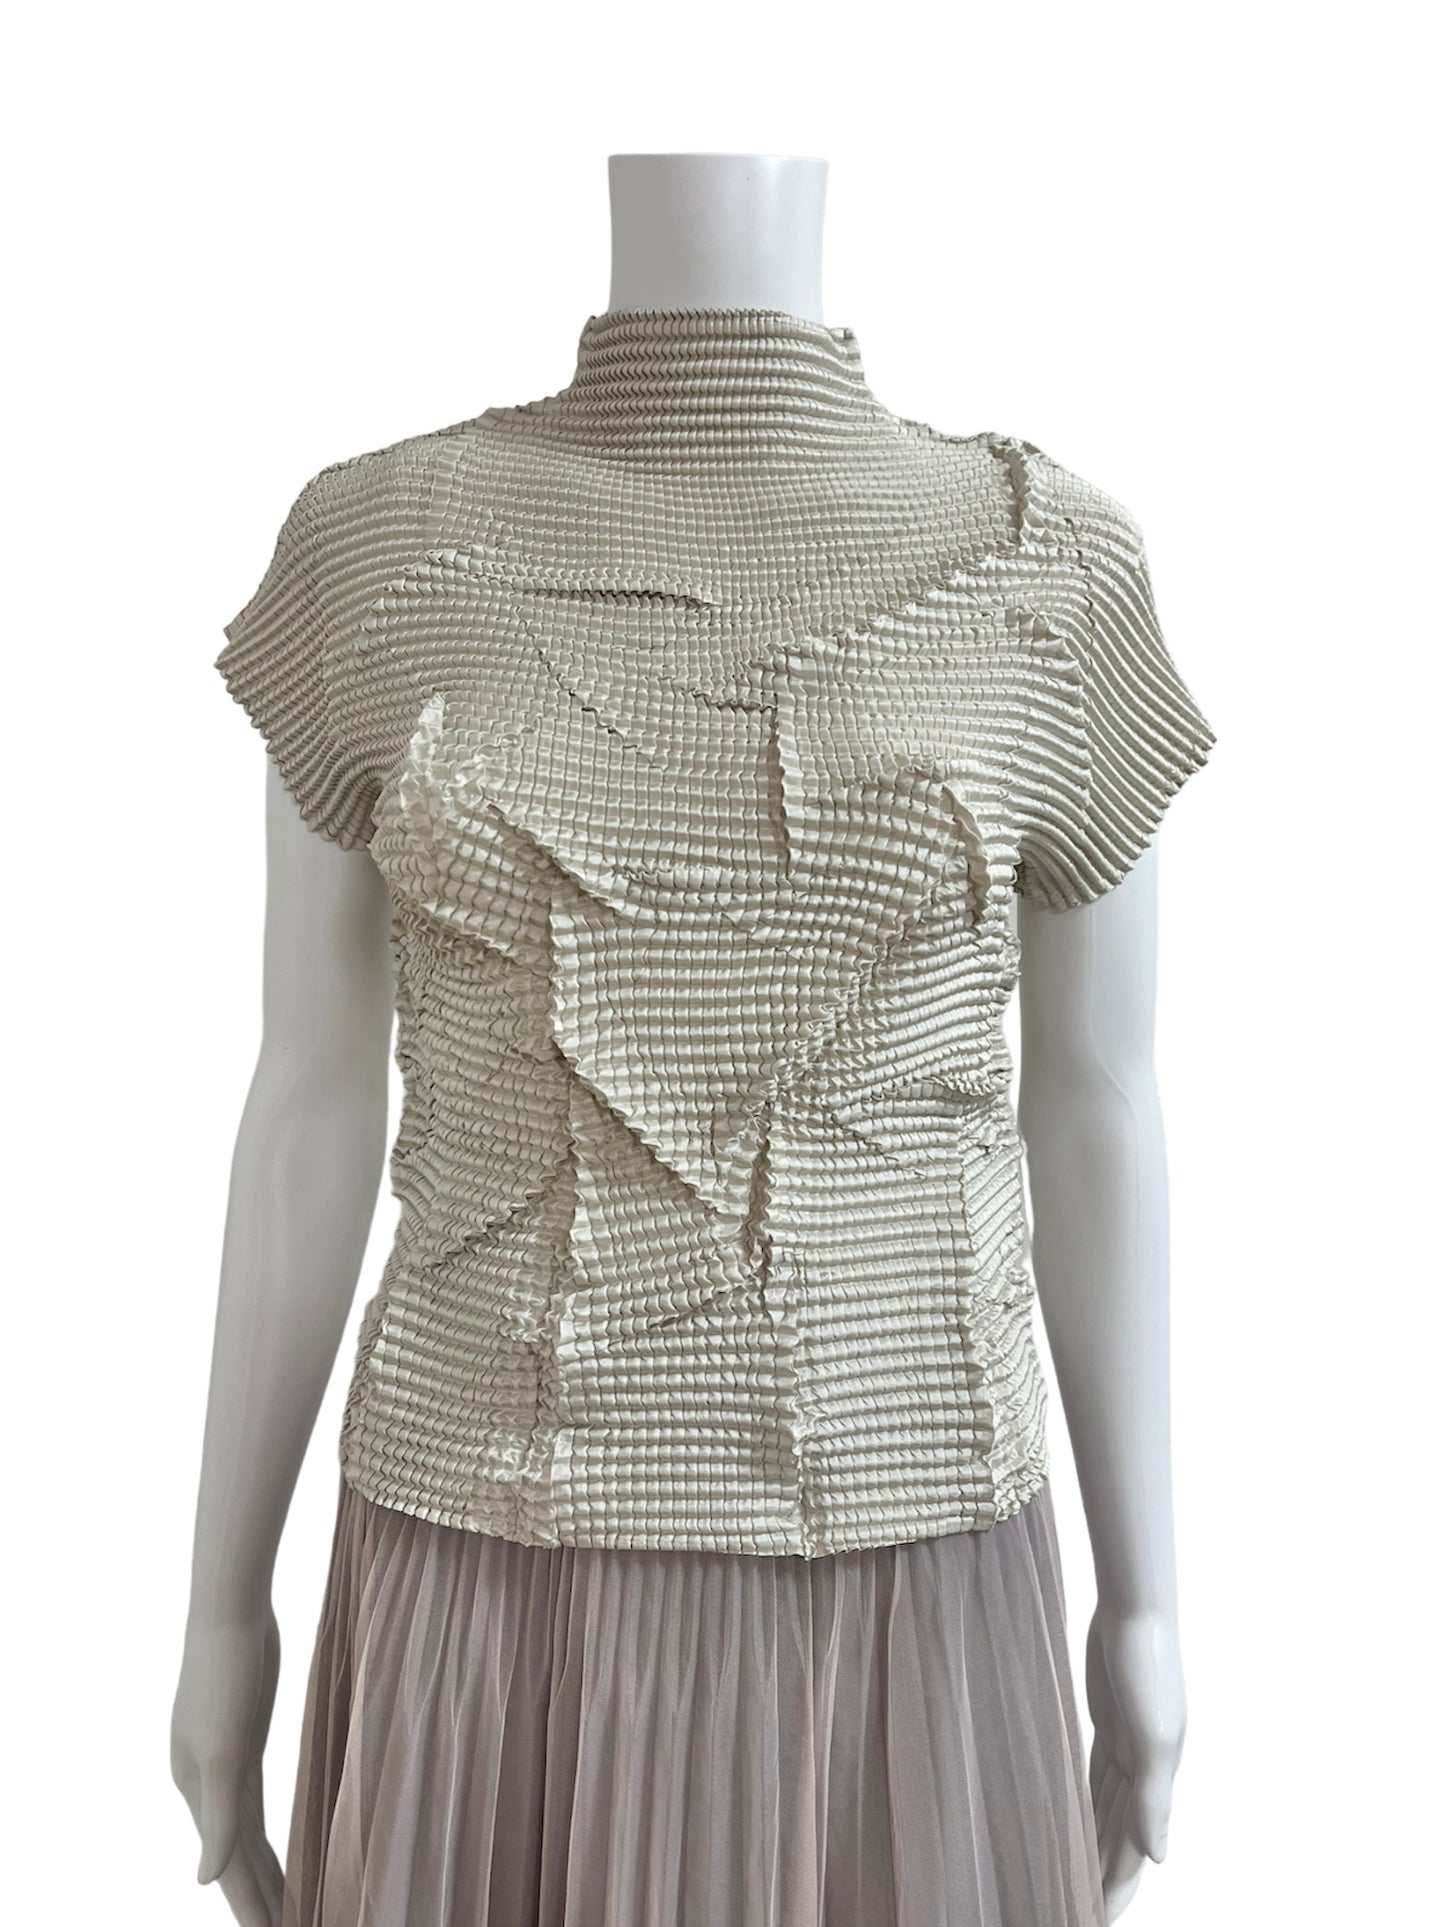 CRISTAL FRENCH TOP MAY